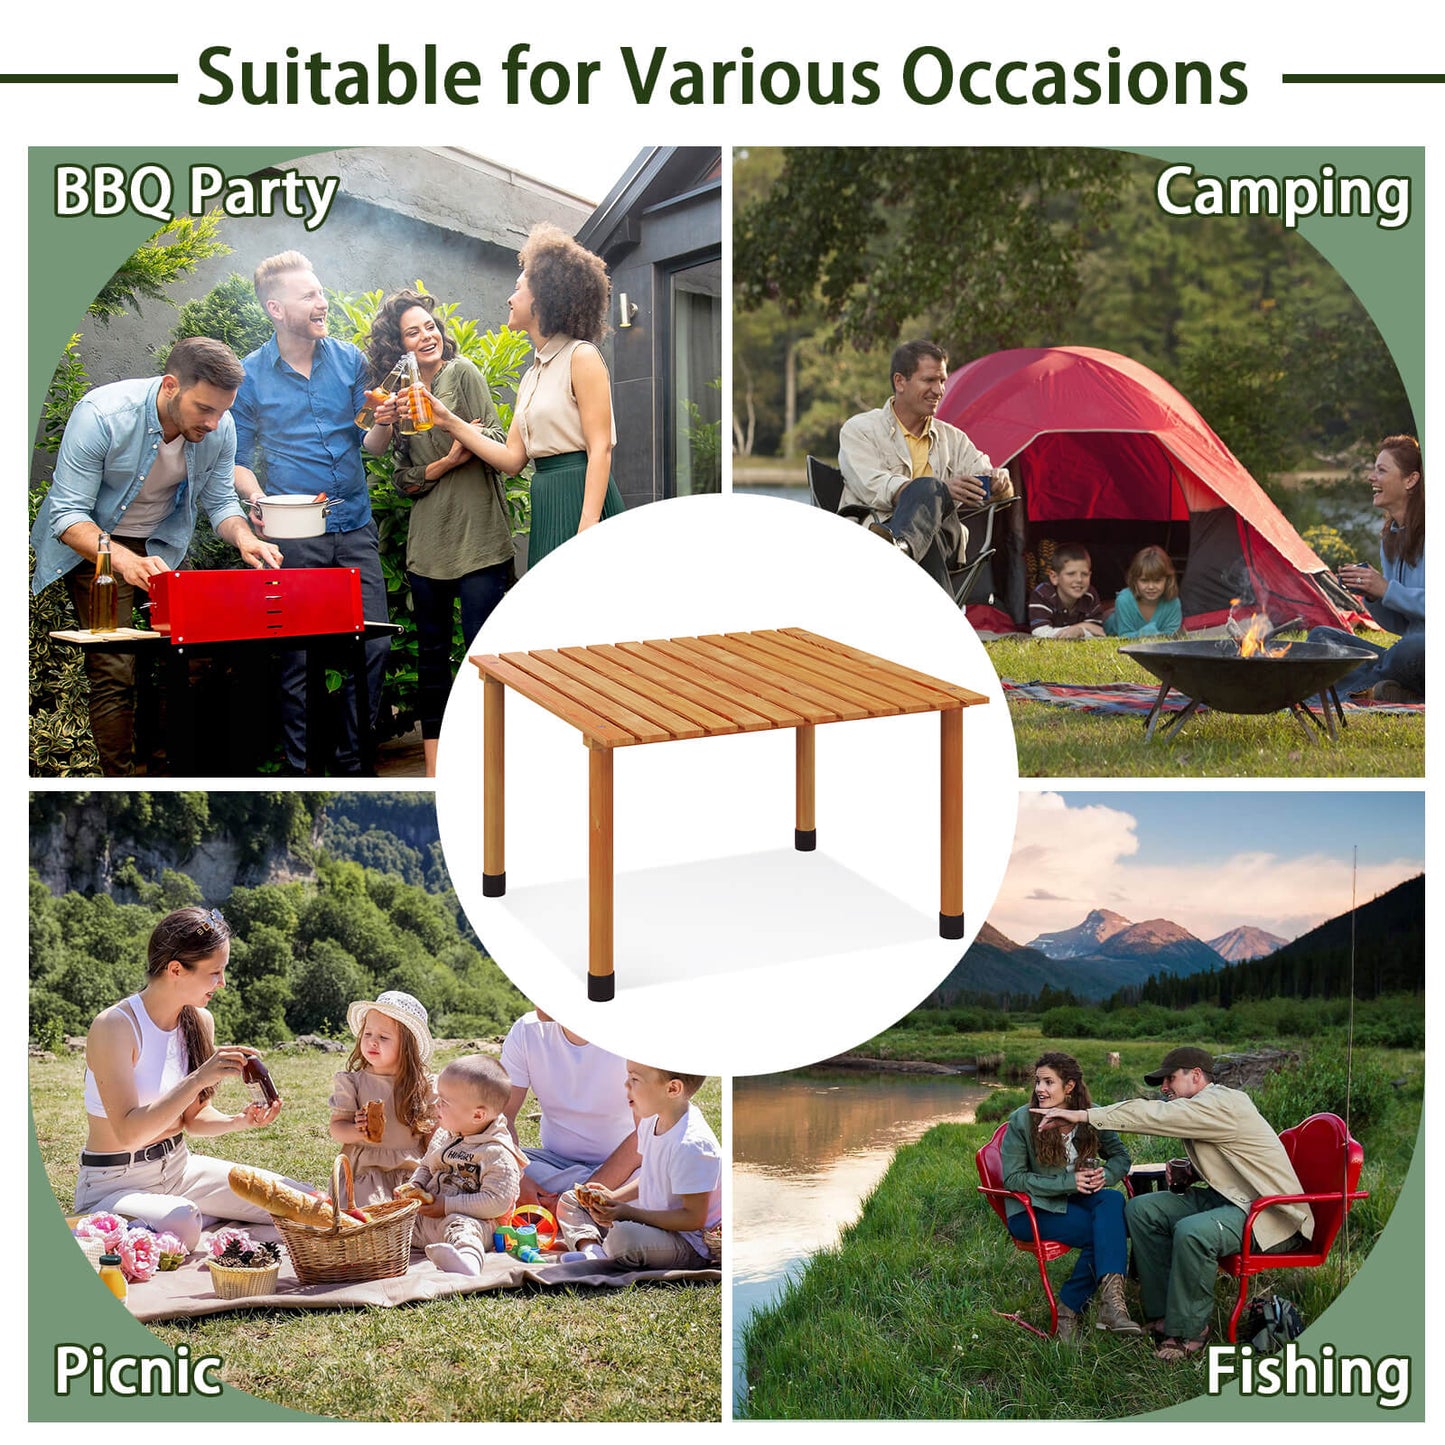 Folding Outdoor Camping Table with Carrying Bag for Picnics and Party, Natural